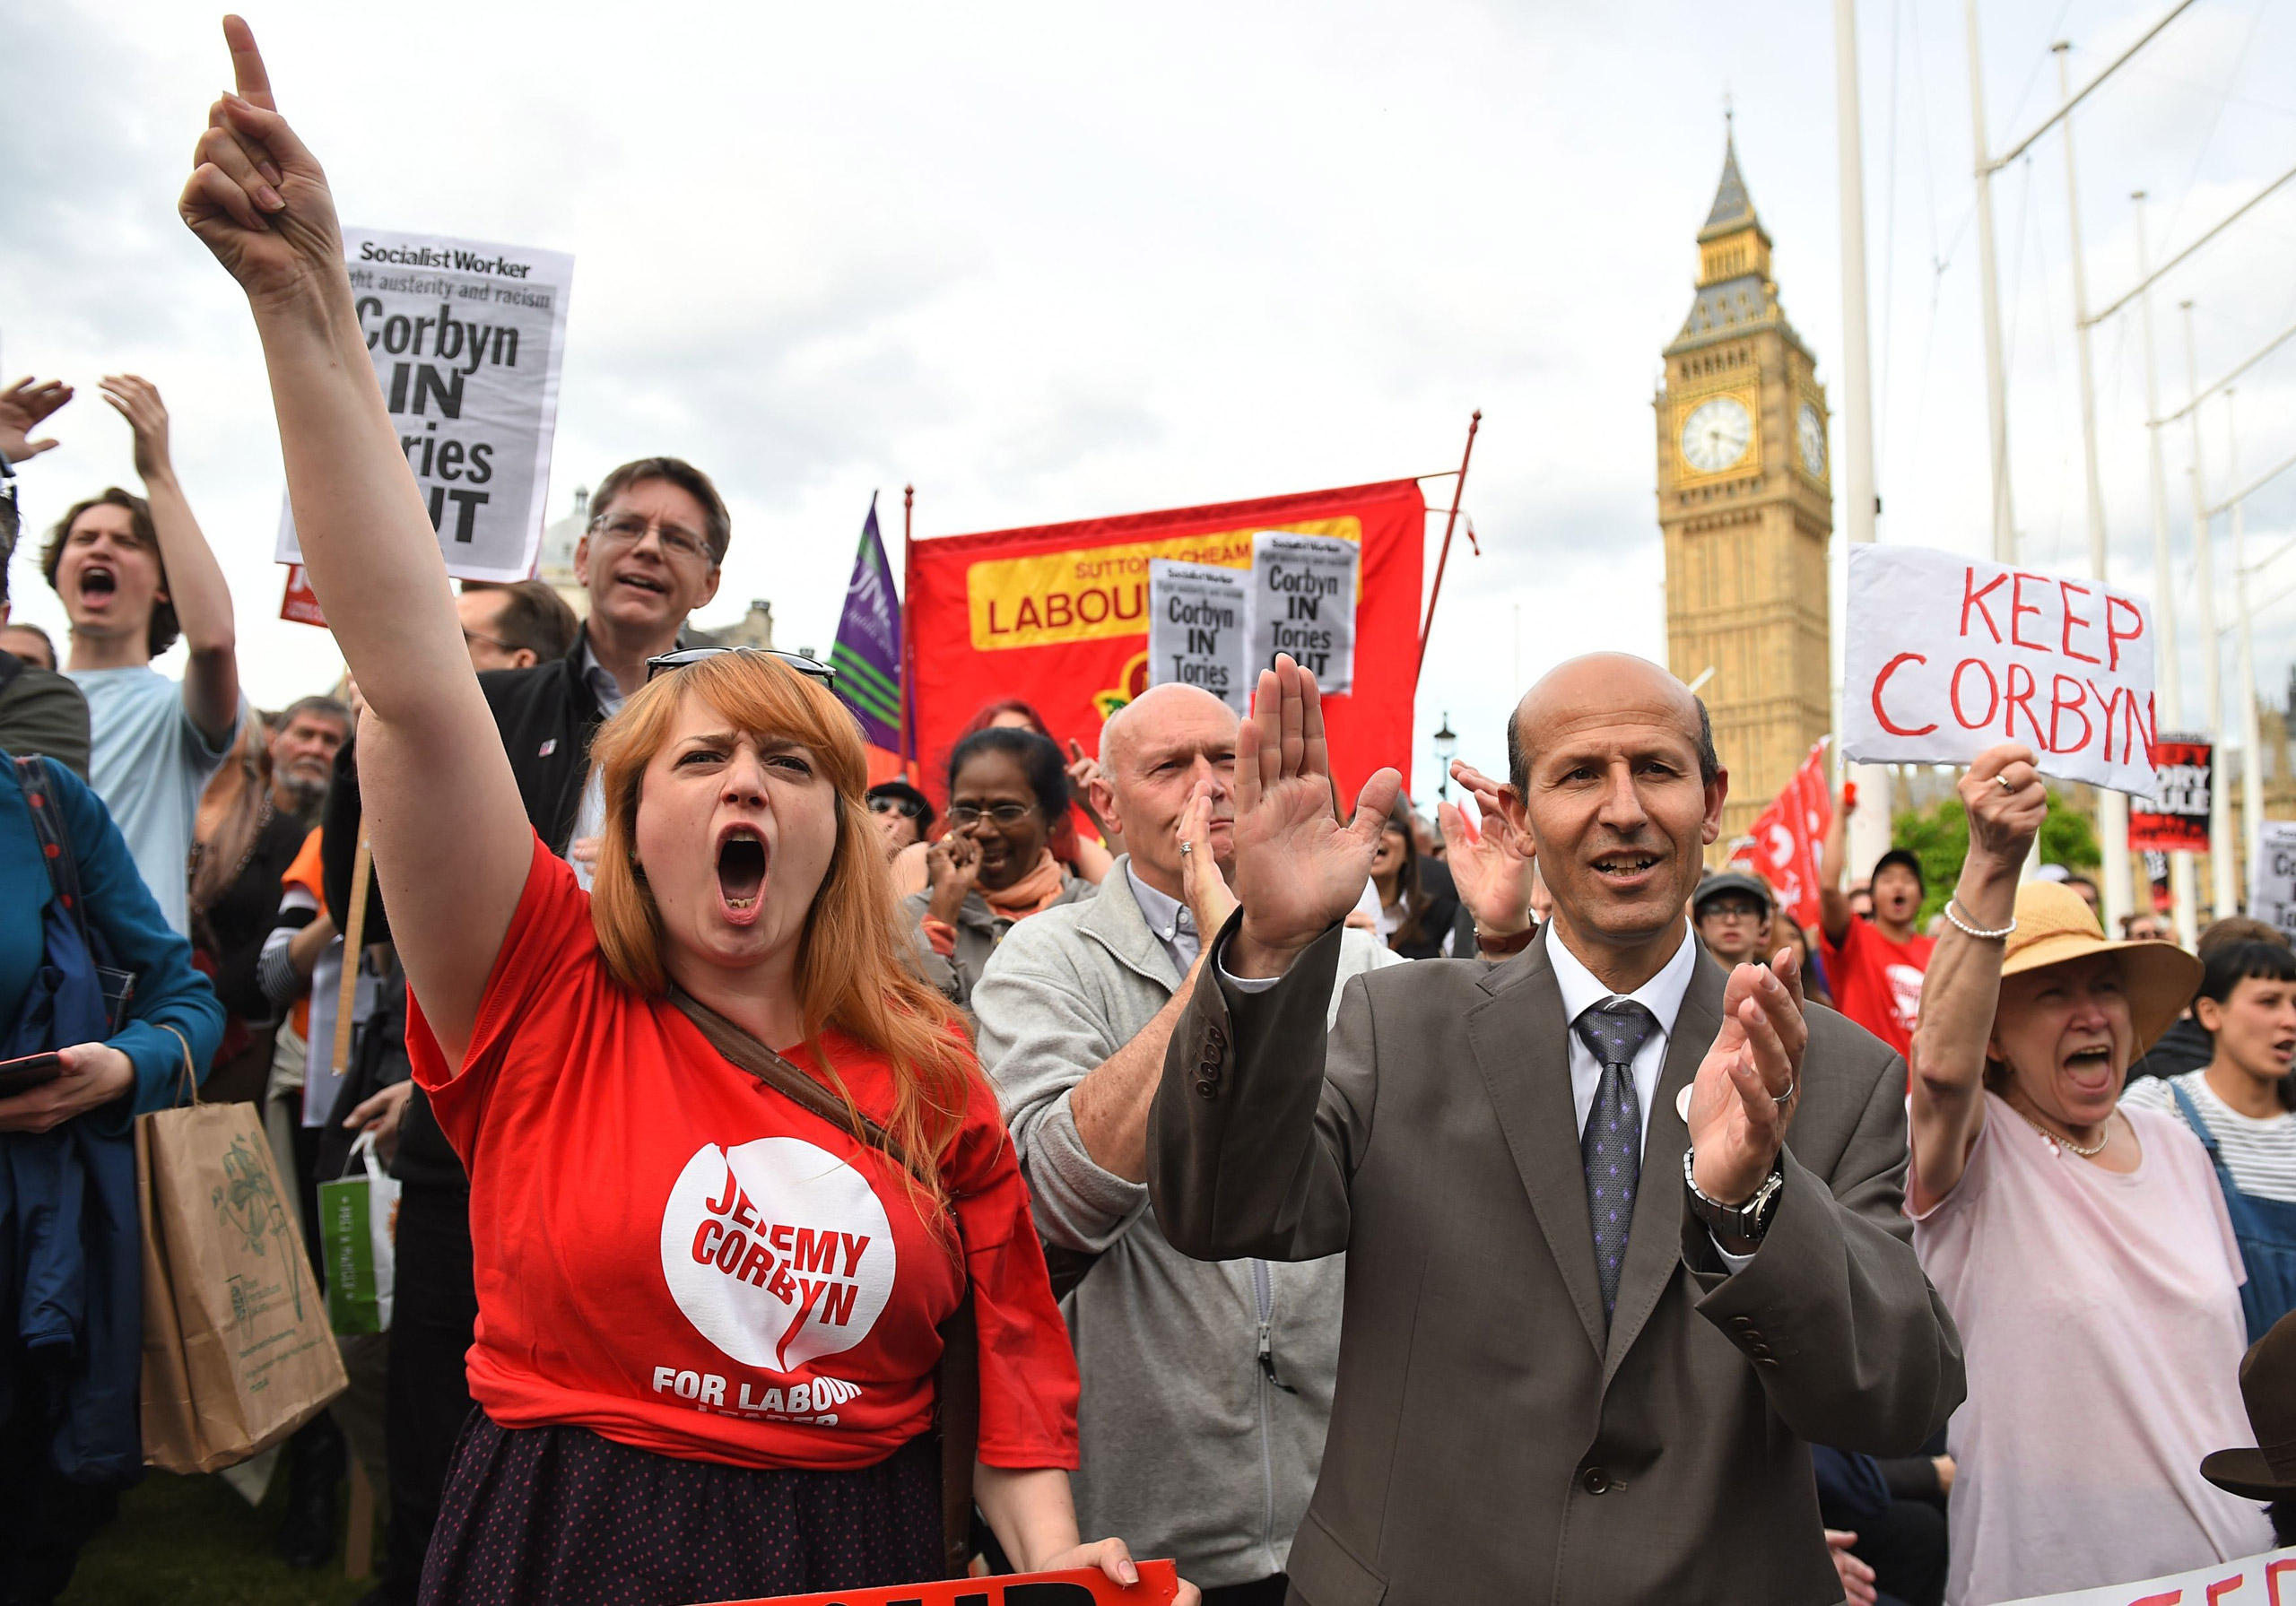 Corbyn supporters hold a demonstration outside the Houses of Parliament as Labour MPs meet inside on June 27 (Dominic Lipinski—PA/AP)